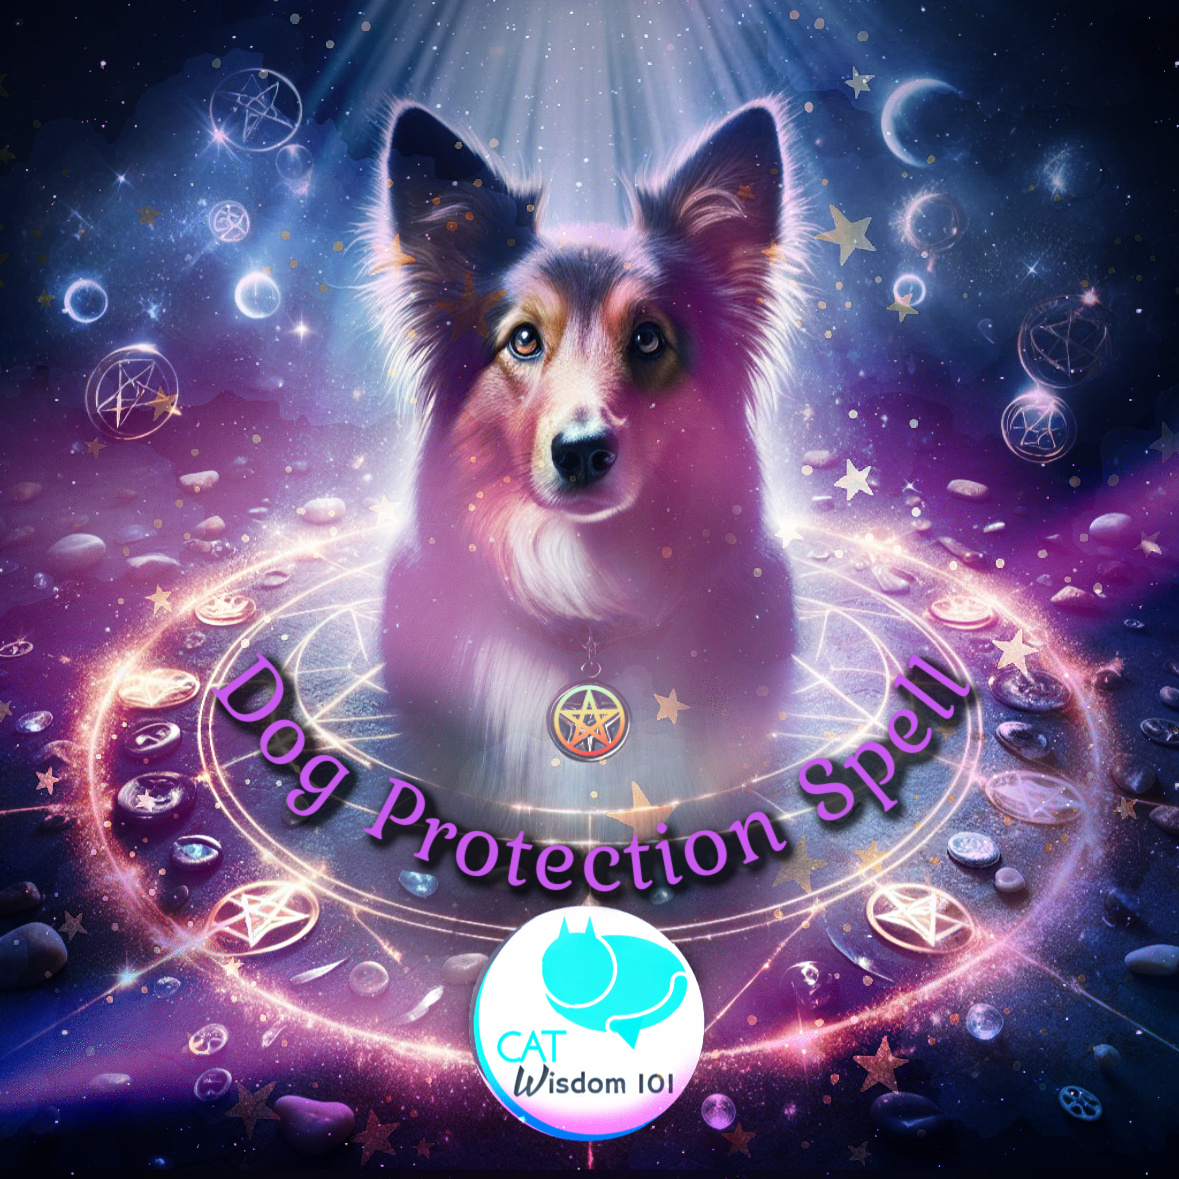 dog protection spell